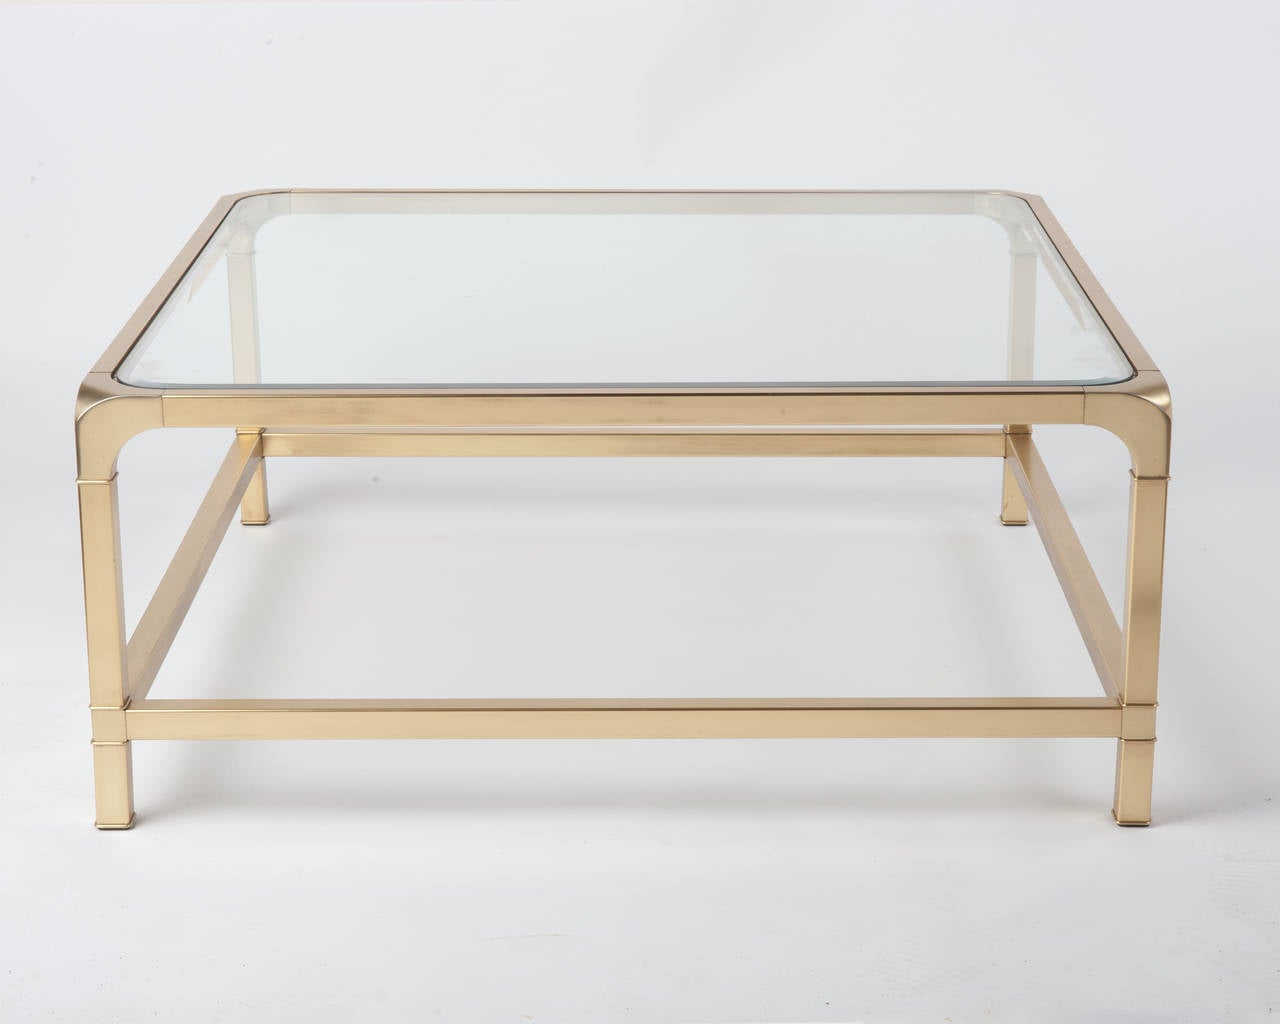 Sleek clean lines, brass and glass square coffee table in the style of Milo Baughman. Beveled glass insert. 
It has been professionally restored and lacquered. Still has some age appropriate pitting, most noticeably inside where the glass sits.